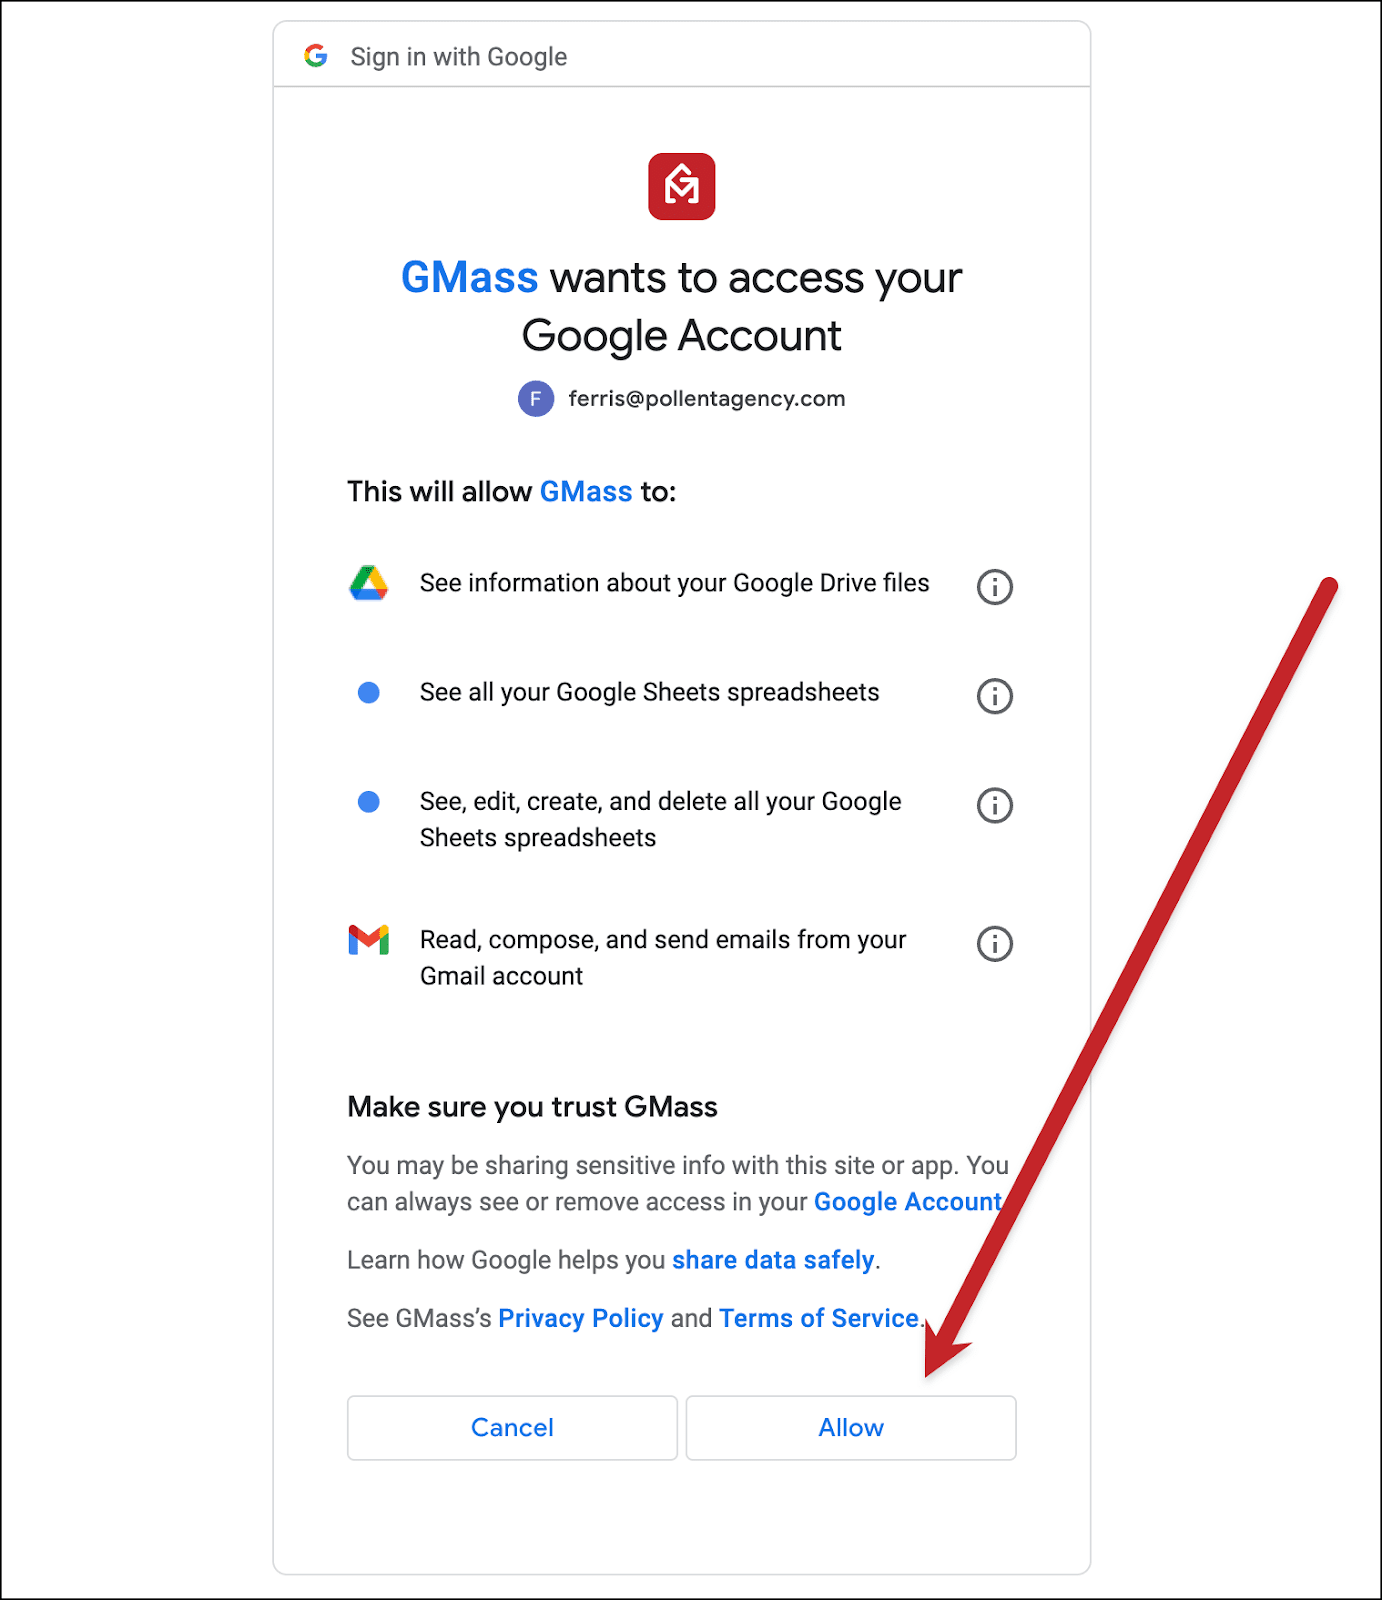 Give permissions for email access